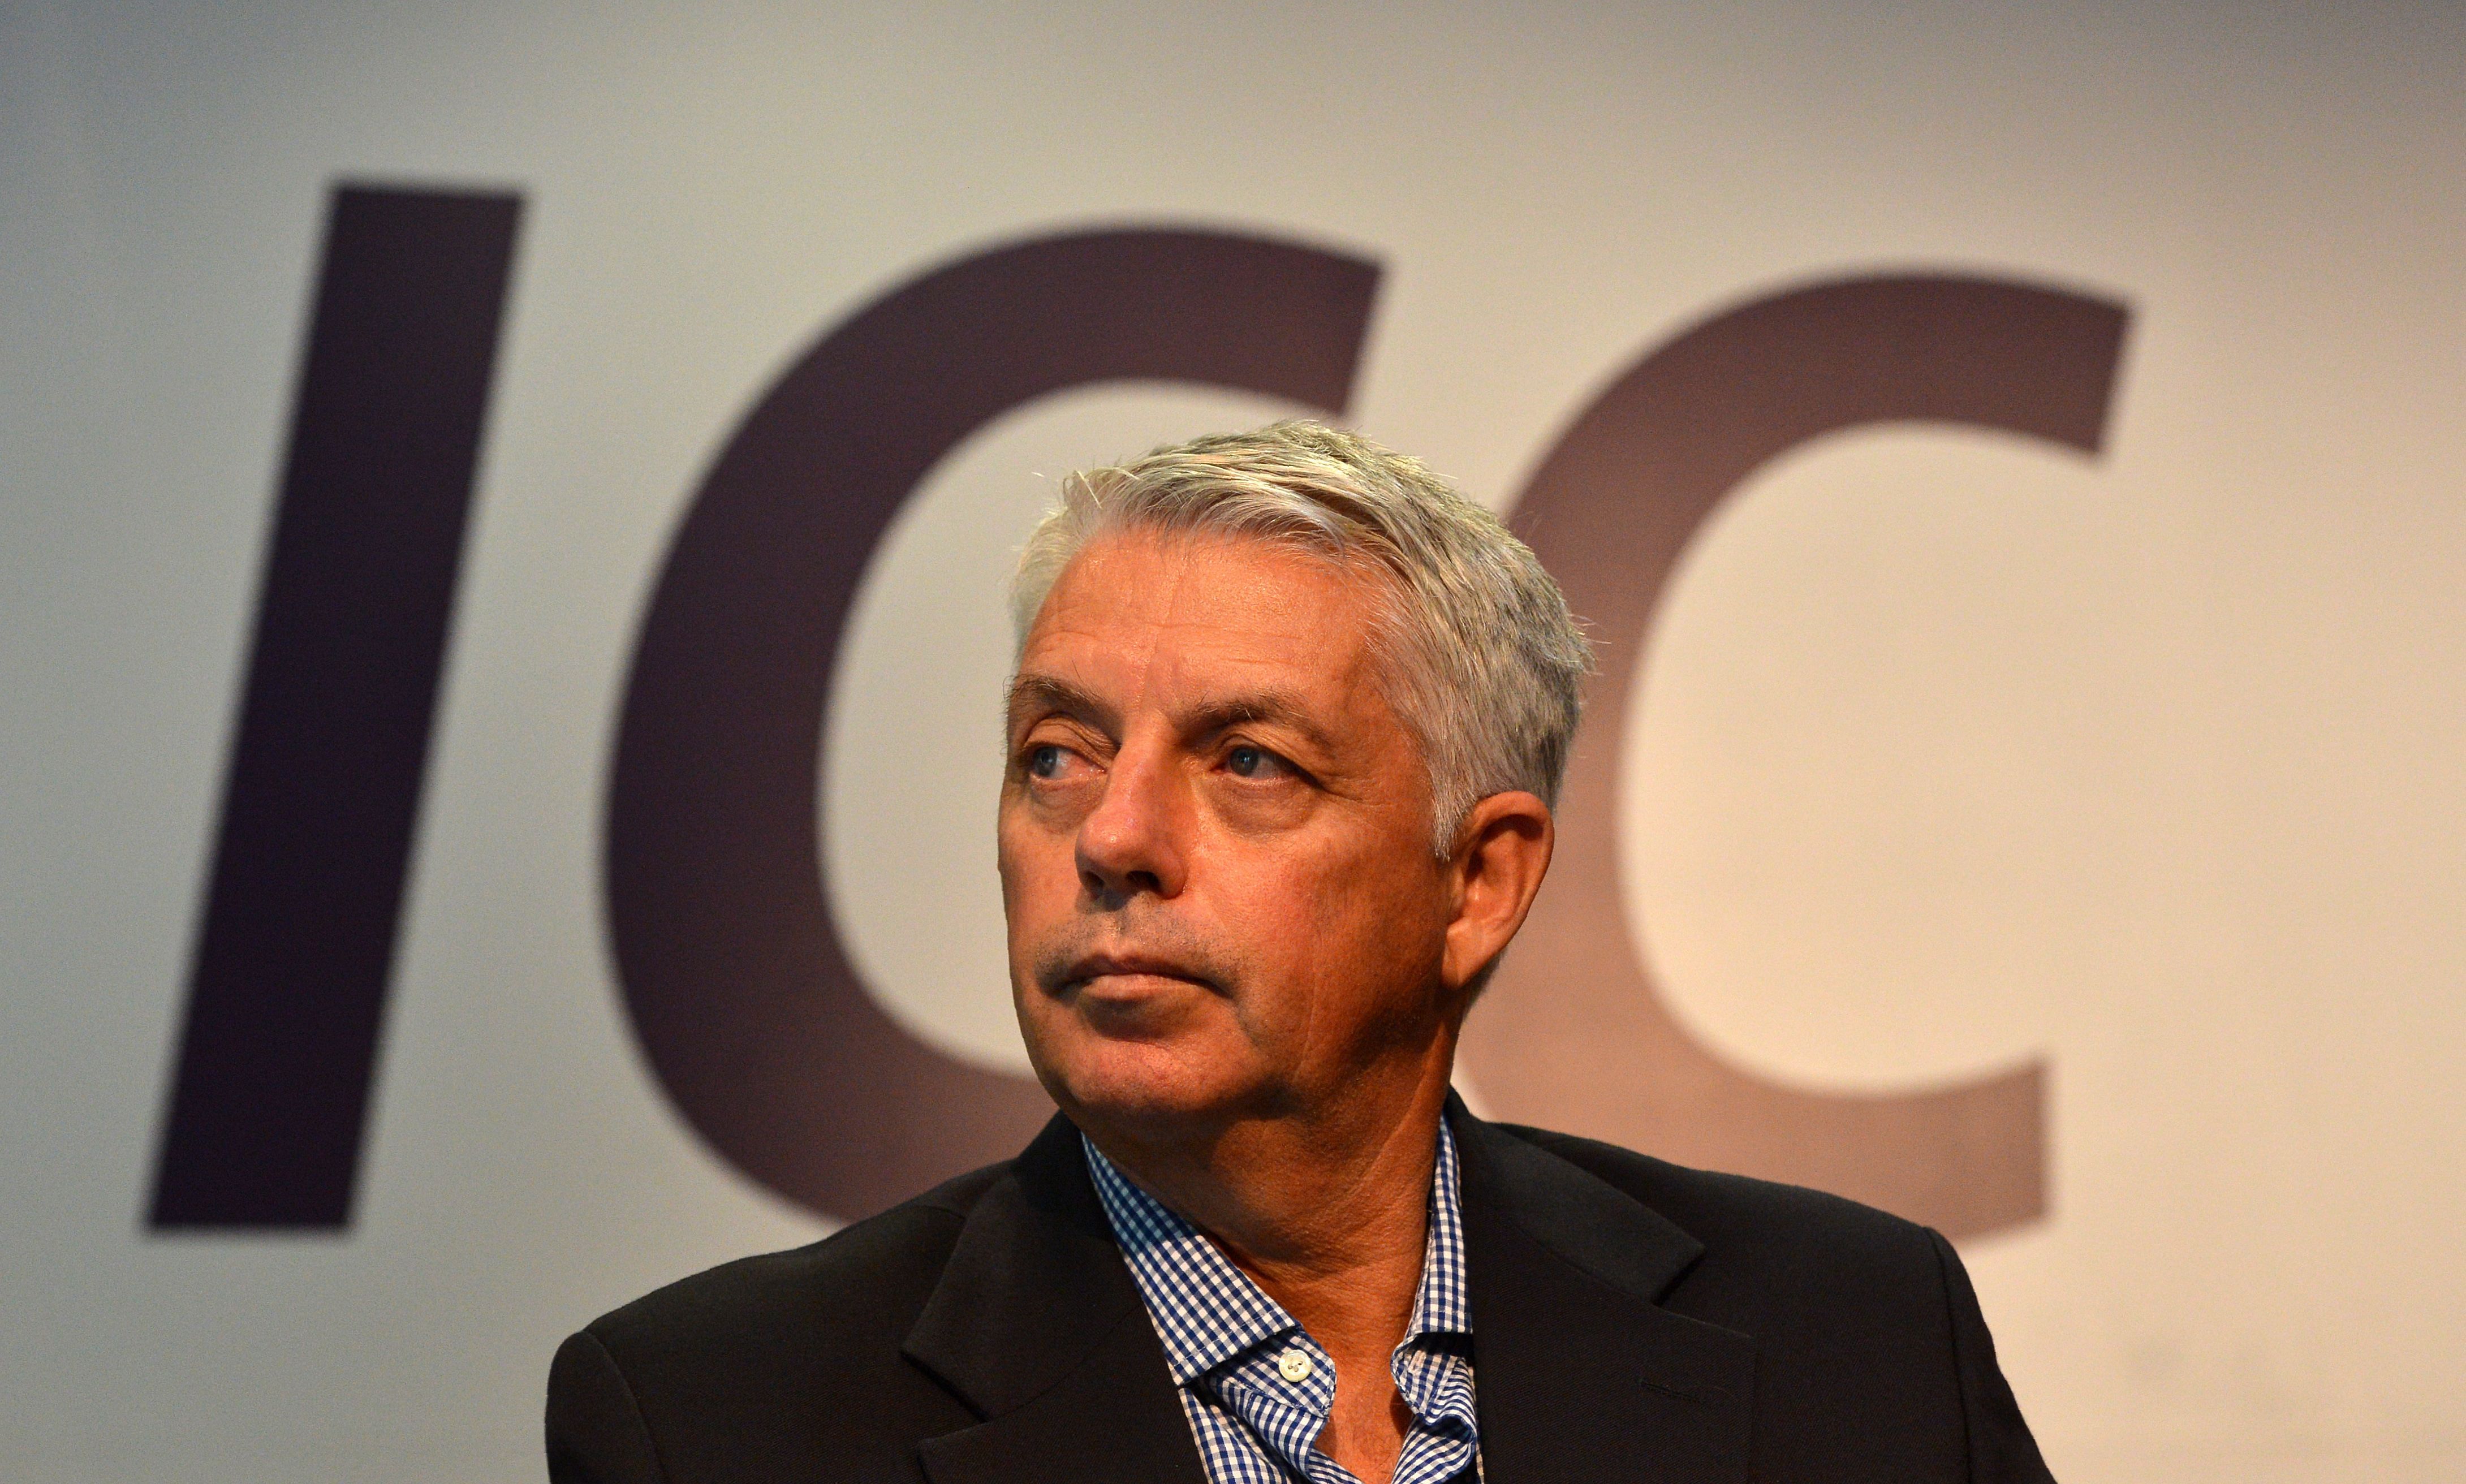 International Cricket Council (ICC) chief executive David Richardson looks on during a press conference. (AFP Photo)